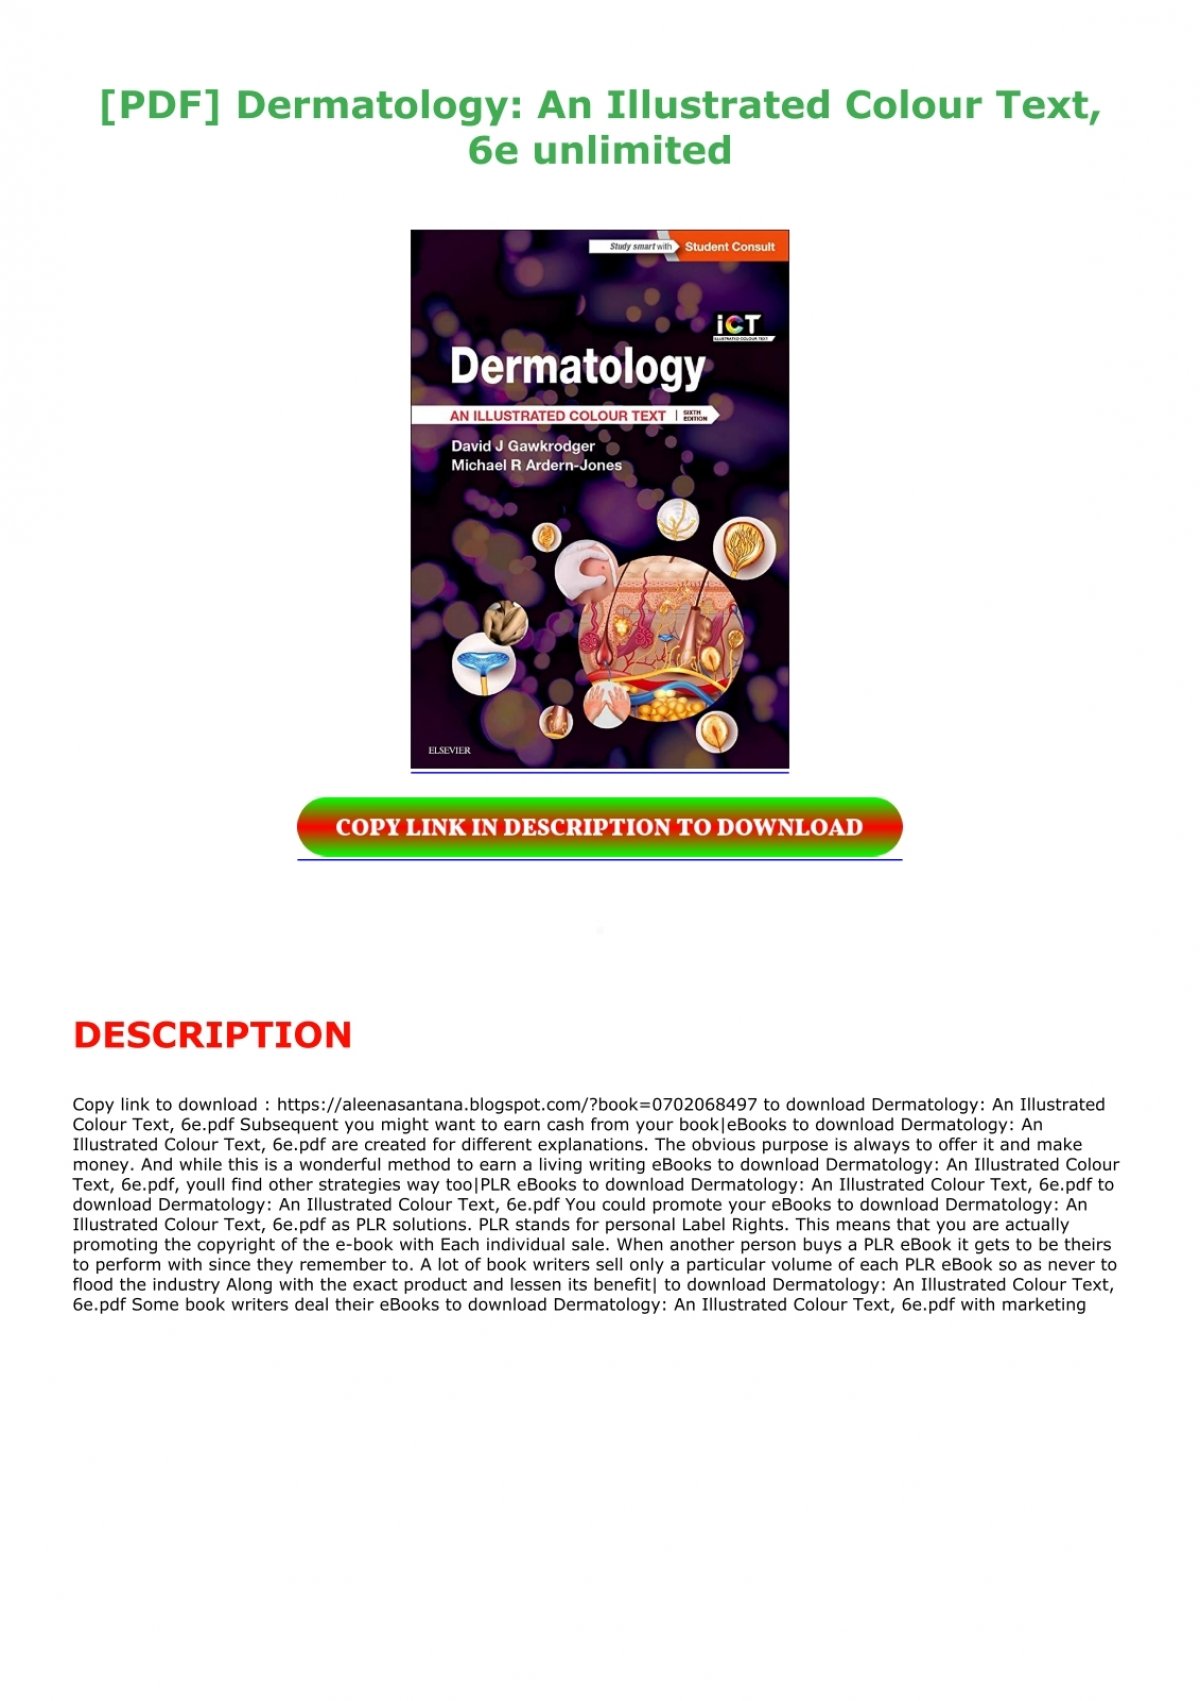 dermatology an illustrated colour text 6th edition pdf free download